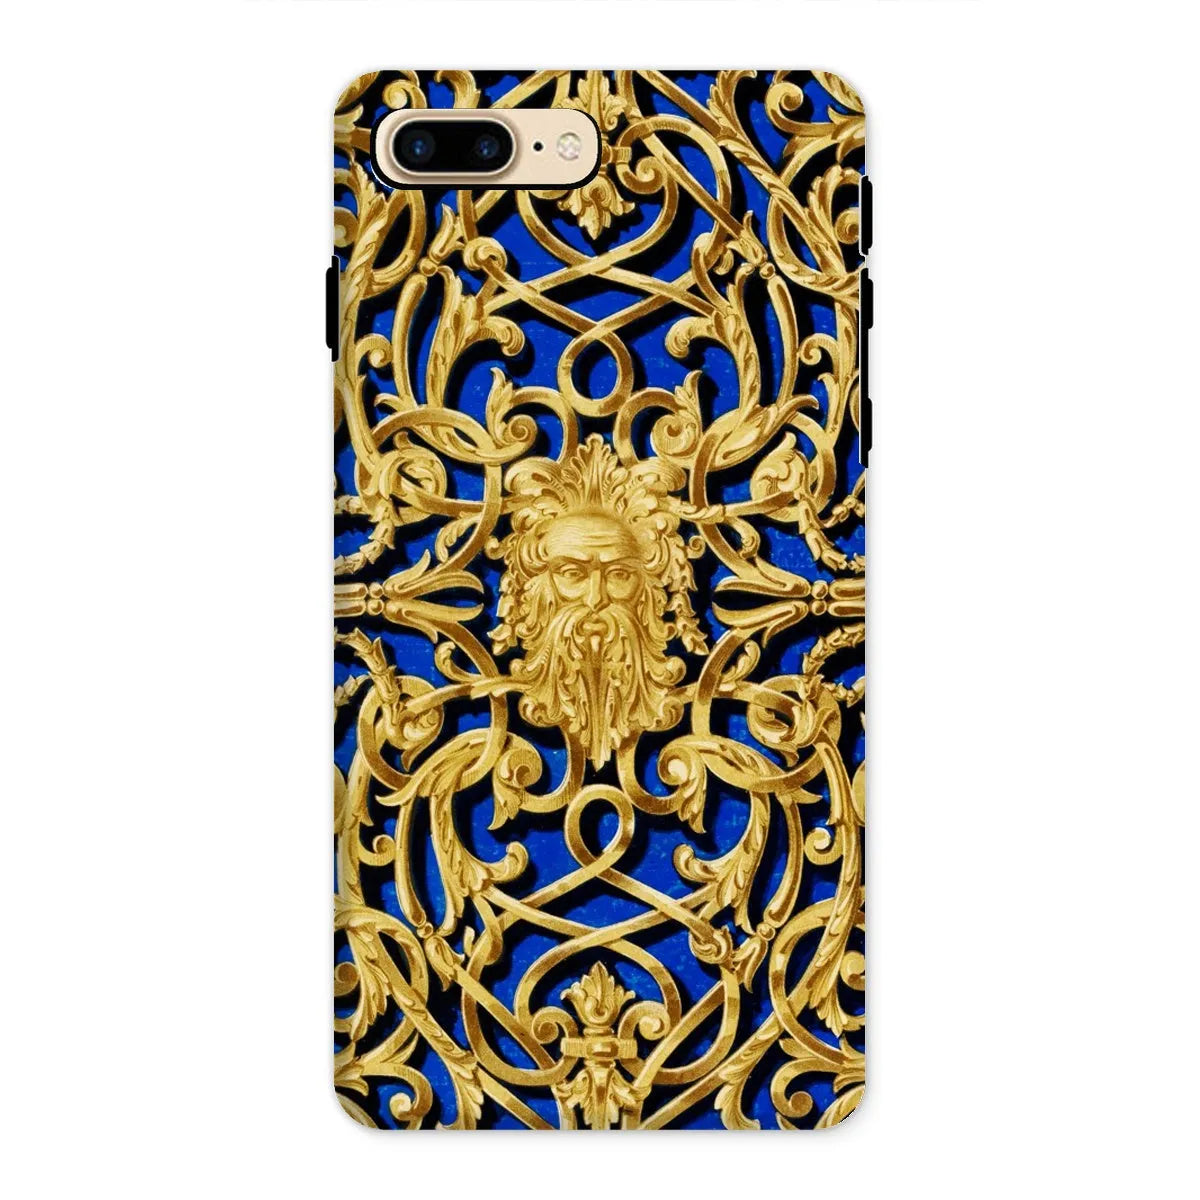 Gilded Gate Victorian Phone Case - Sir Matthew Digby Wyatt - Iphone 8 Plus / Matte - Mobile Phone Cases - Aesthetic Art